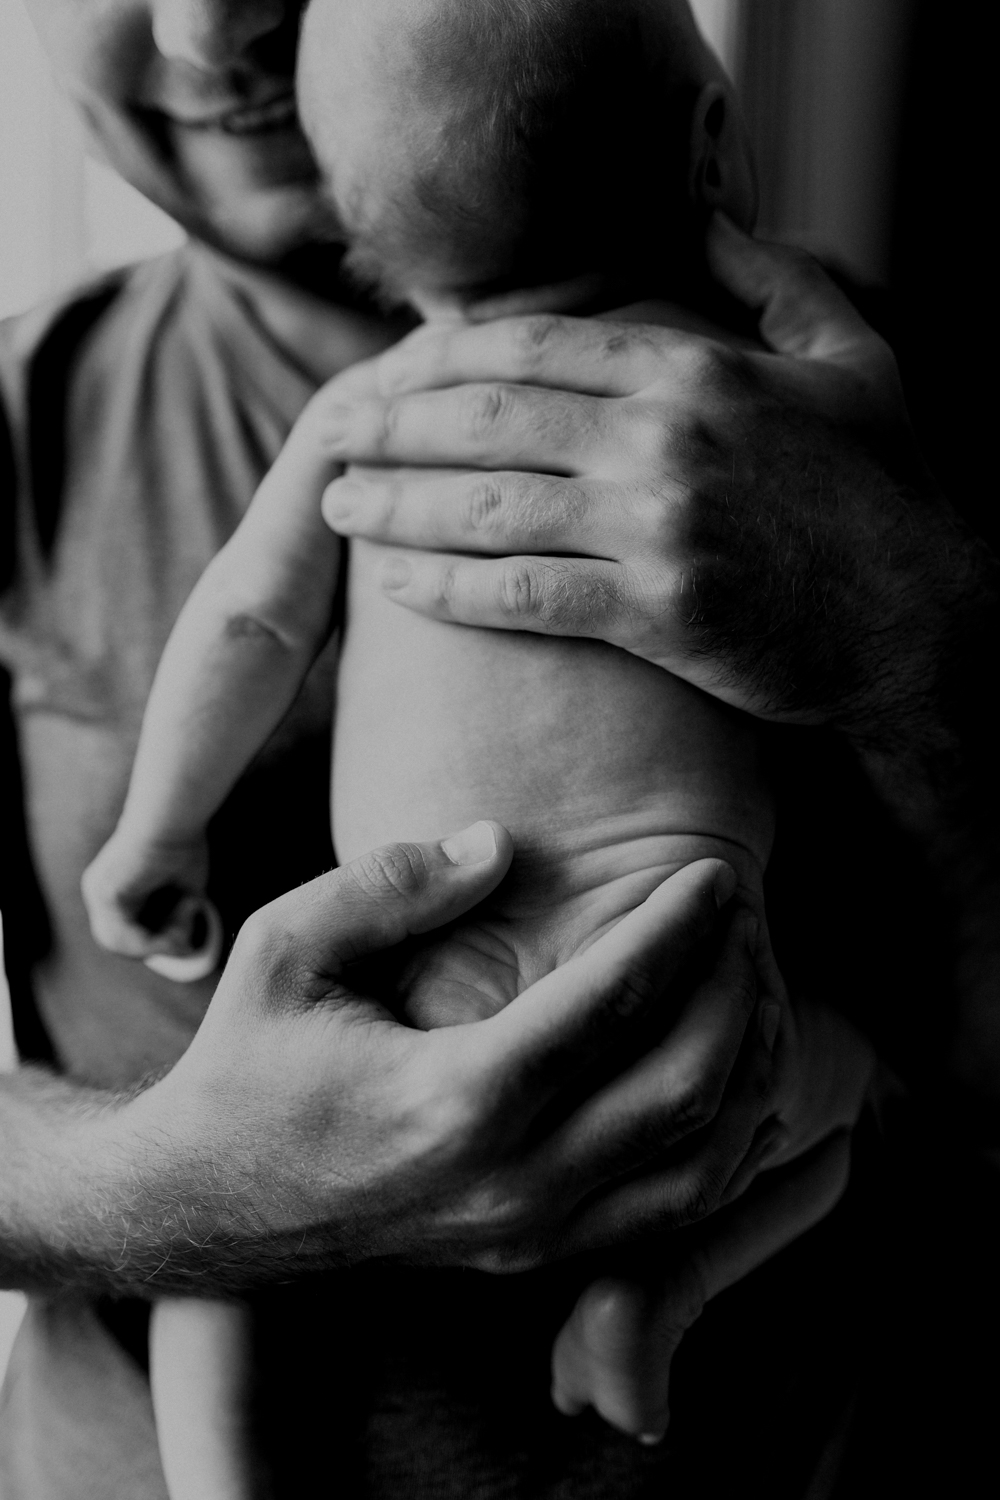 In home lifestyle newborn photo session | Black and white dad holding newborn | Hampshire lifestyle newborn photography | Ewa Jones Photography